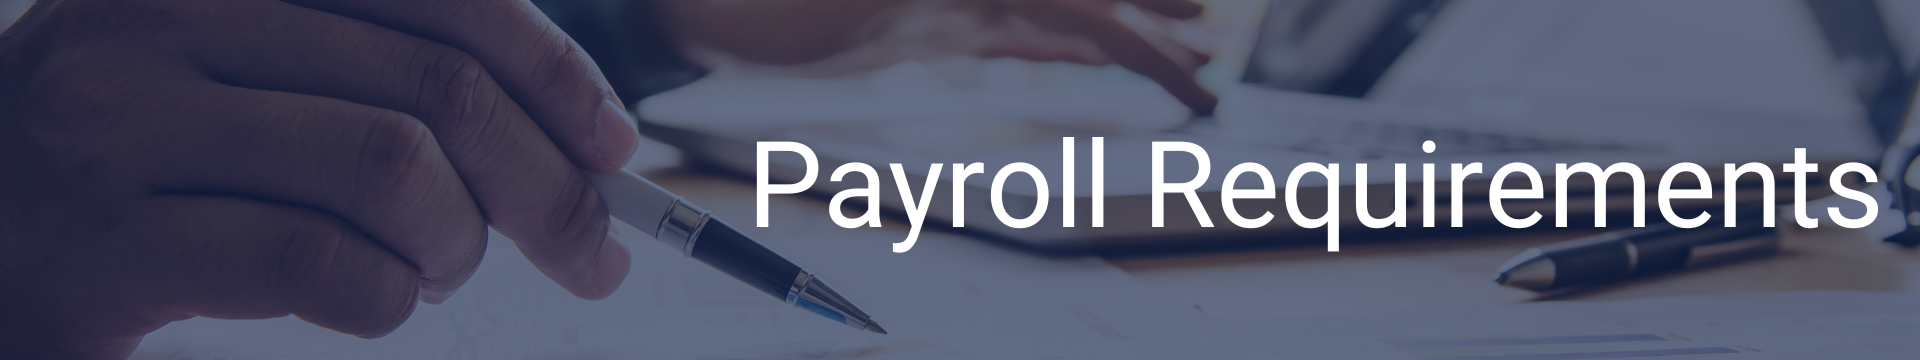 Payroll Requirements